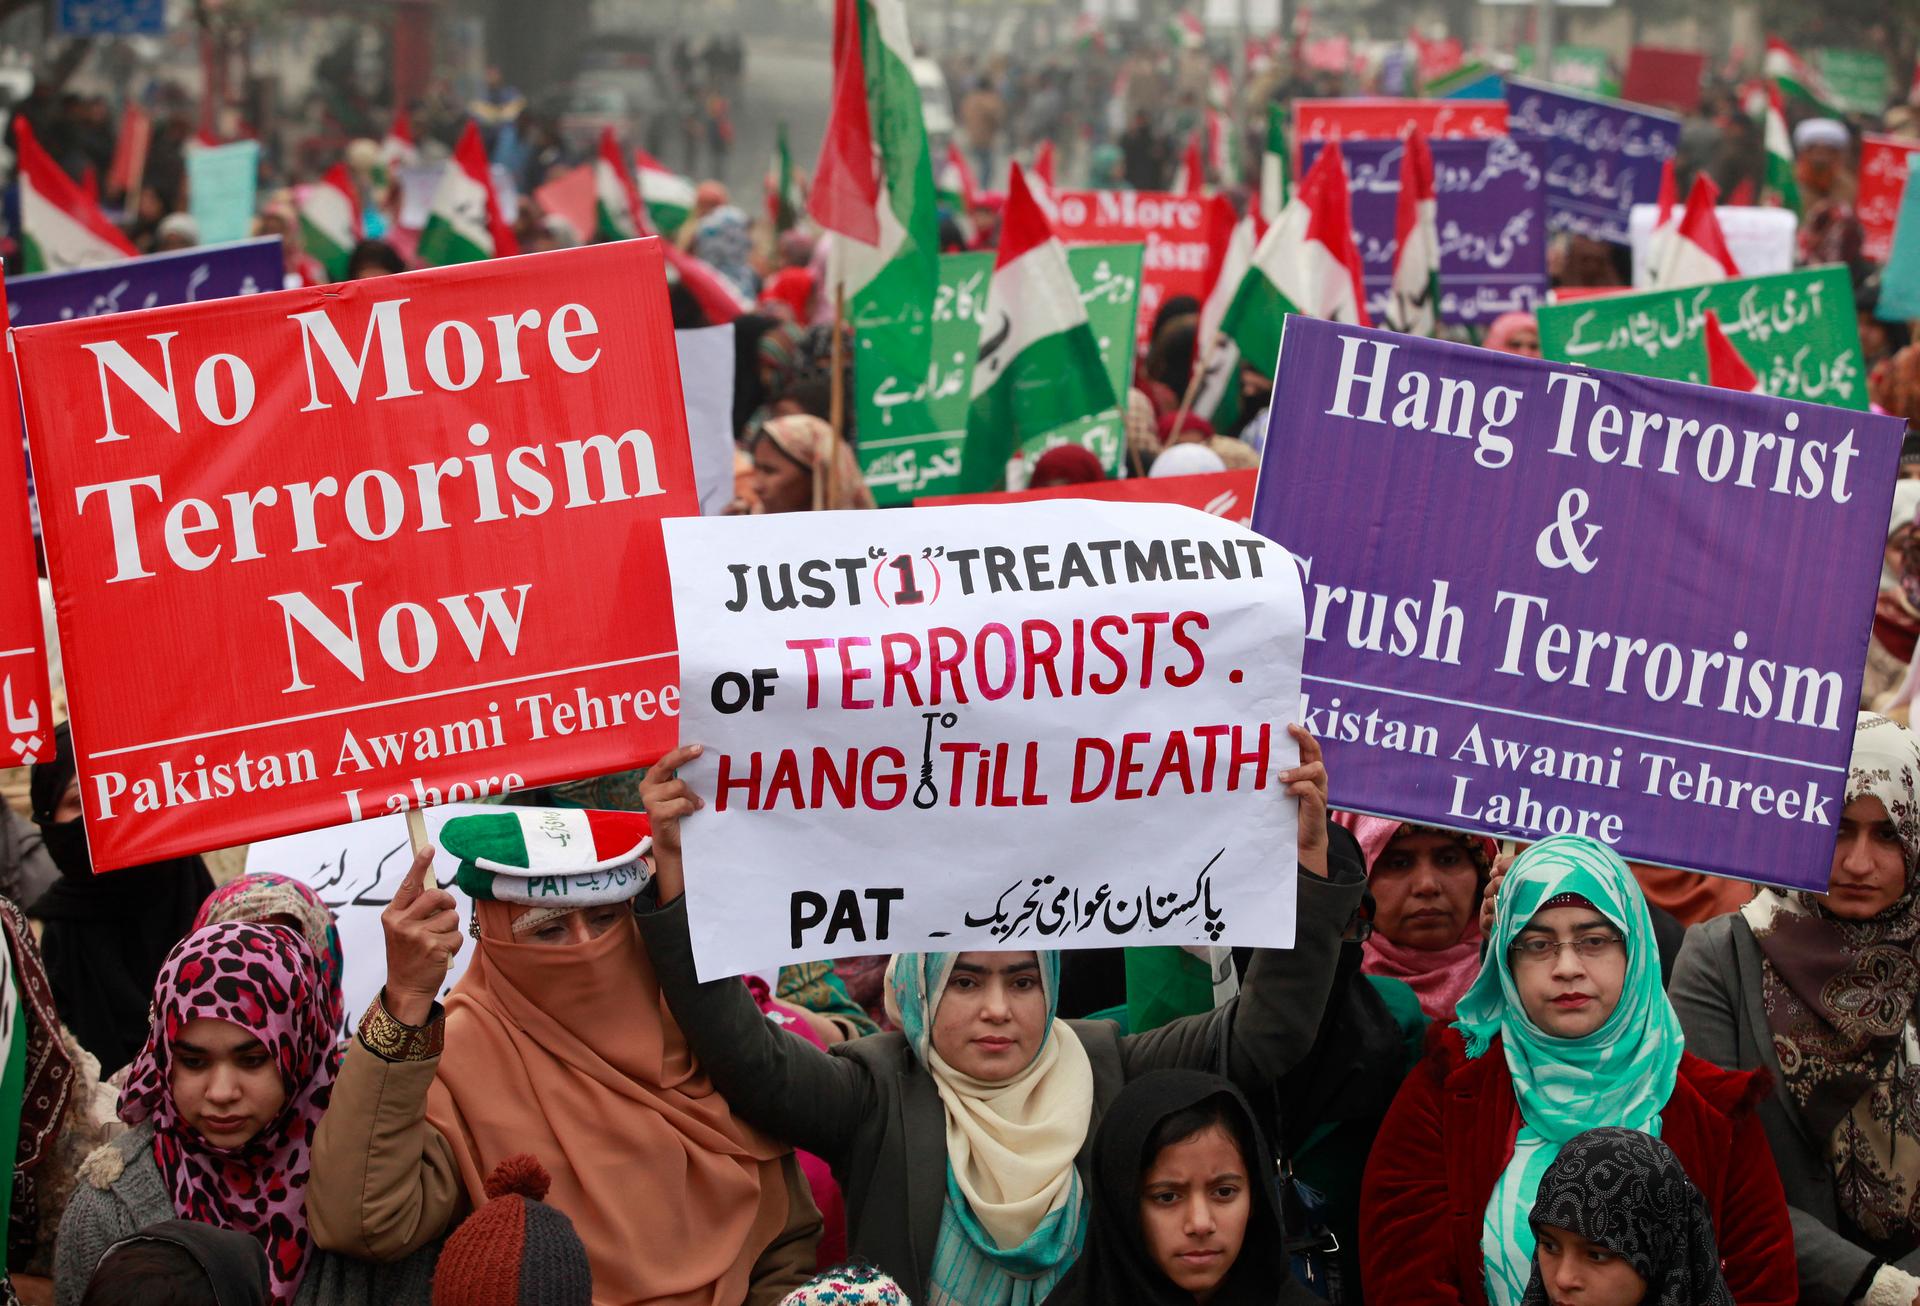 Supporters of Pakistani political party Pakistan Awami Tehreek hold signs to condemn the attack by Taliban gunmen on the Army Public School in Peshawar during a rally in Lahore on December 21, 2014.